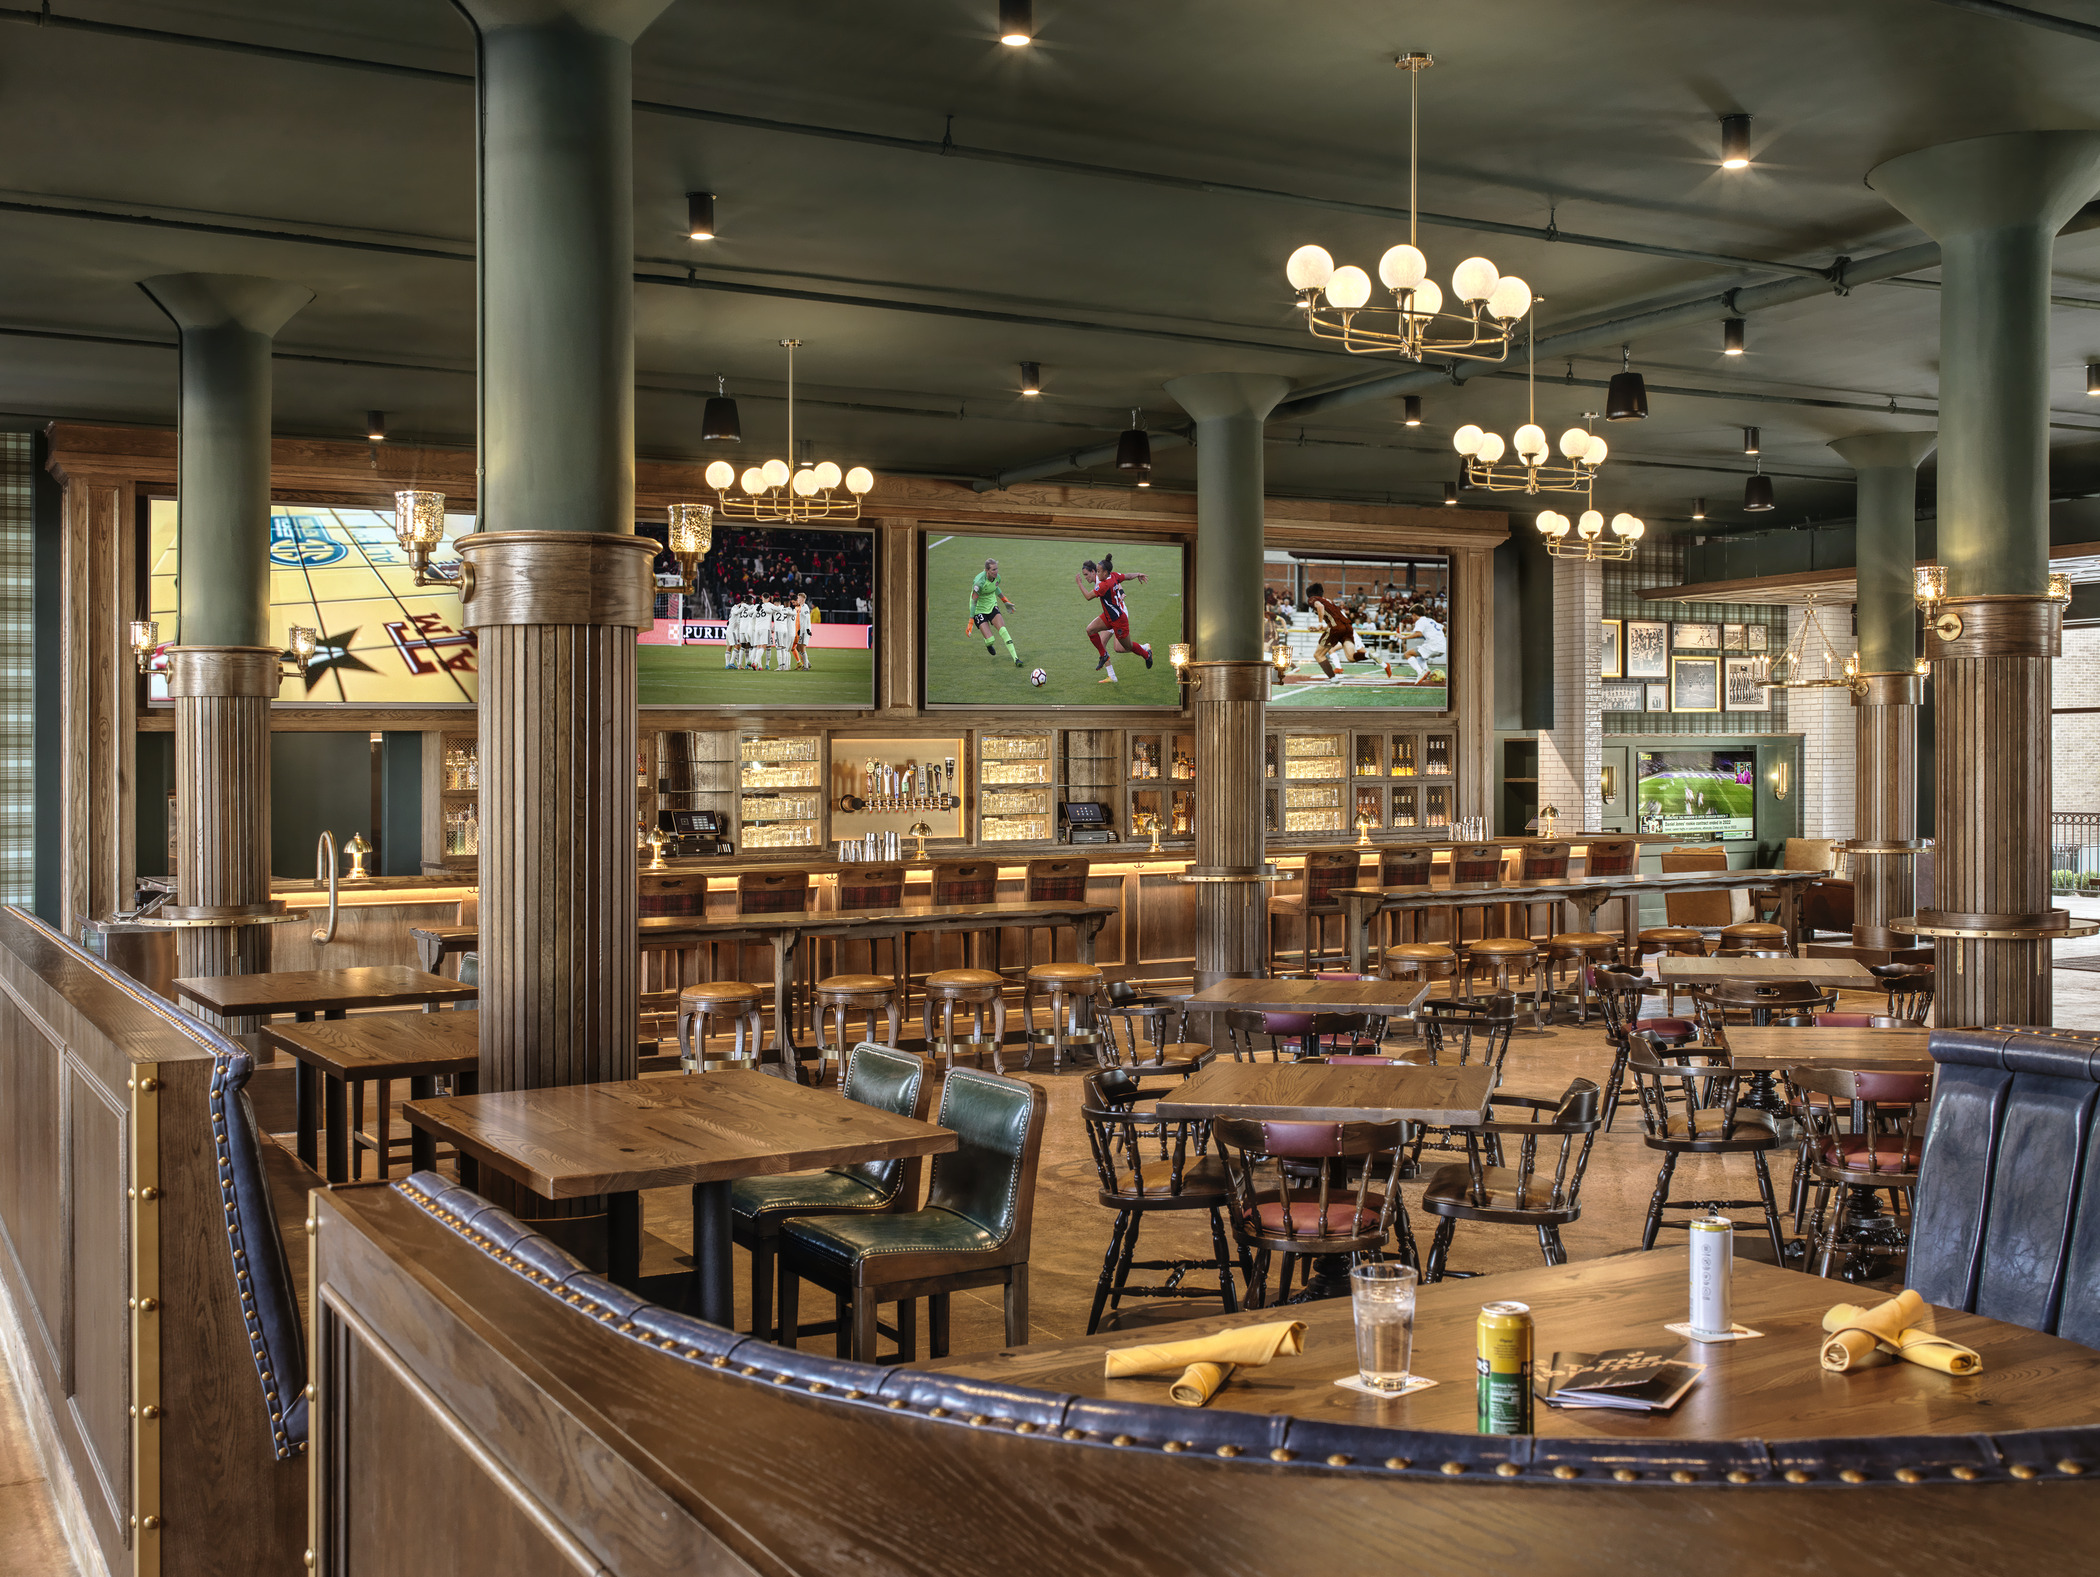 Lush wooden furniture fills an inviting lounge space, with soccer matches playing on TVs over the bar in the rear of the space